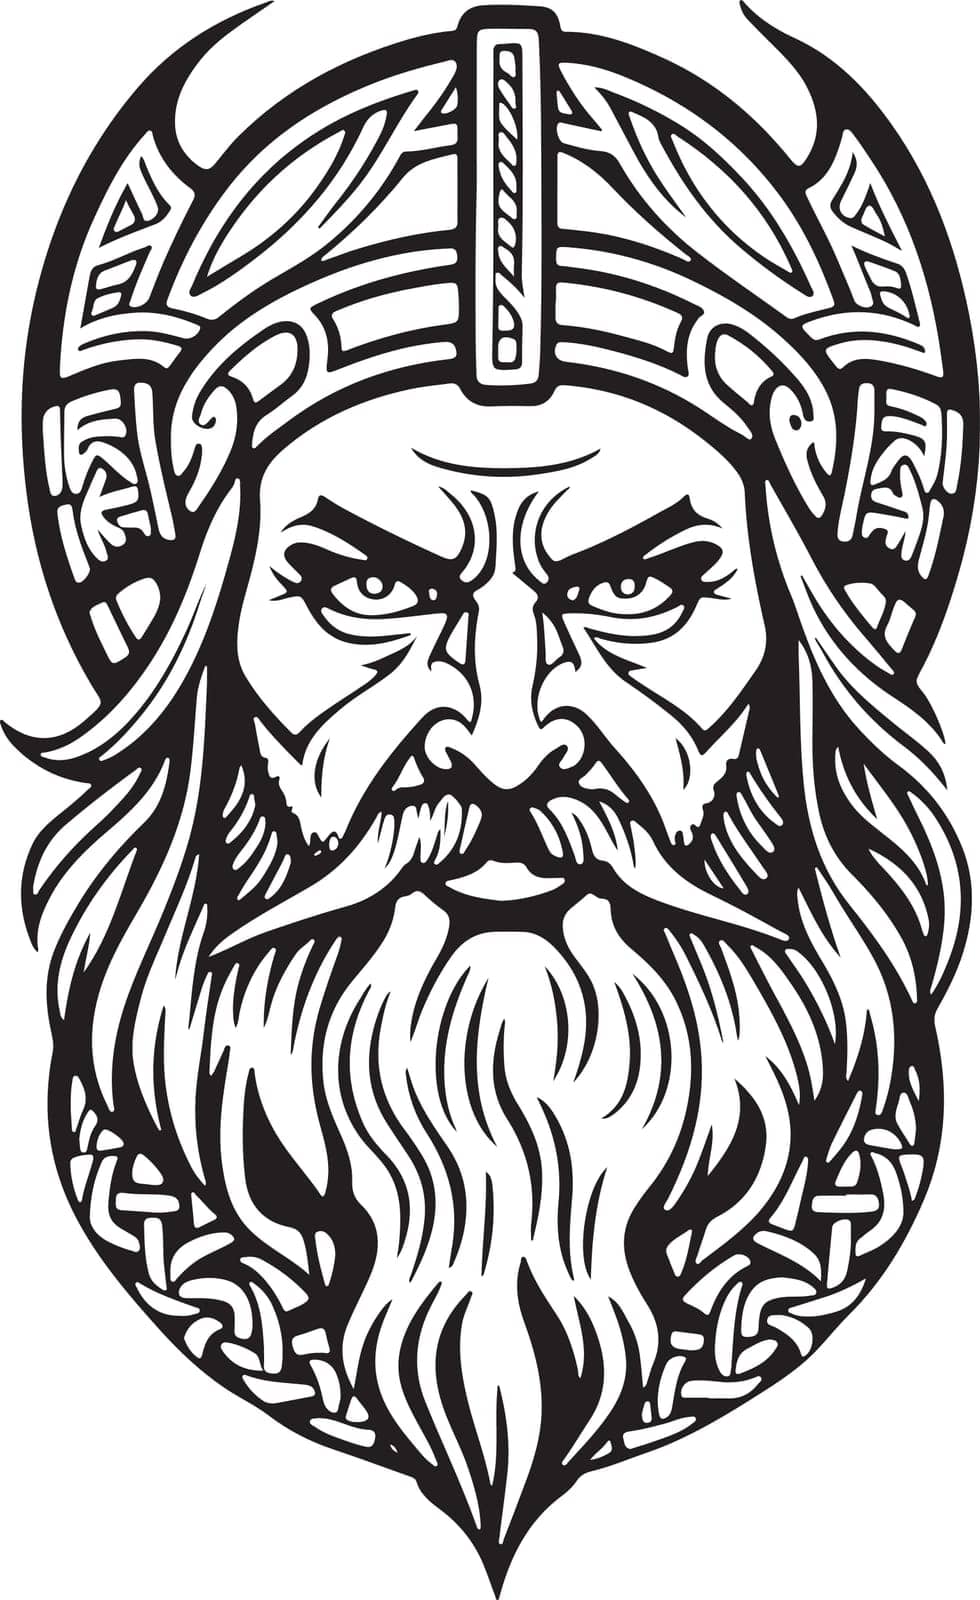 Incredible line art style Viking head vector graphic template, Suitable for logo design, tattoo design or print on demand. Vector illustration